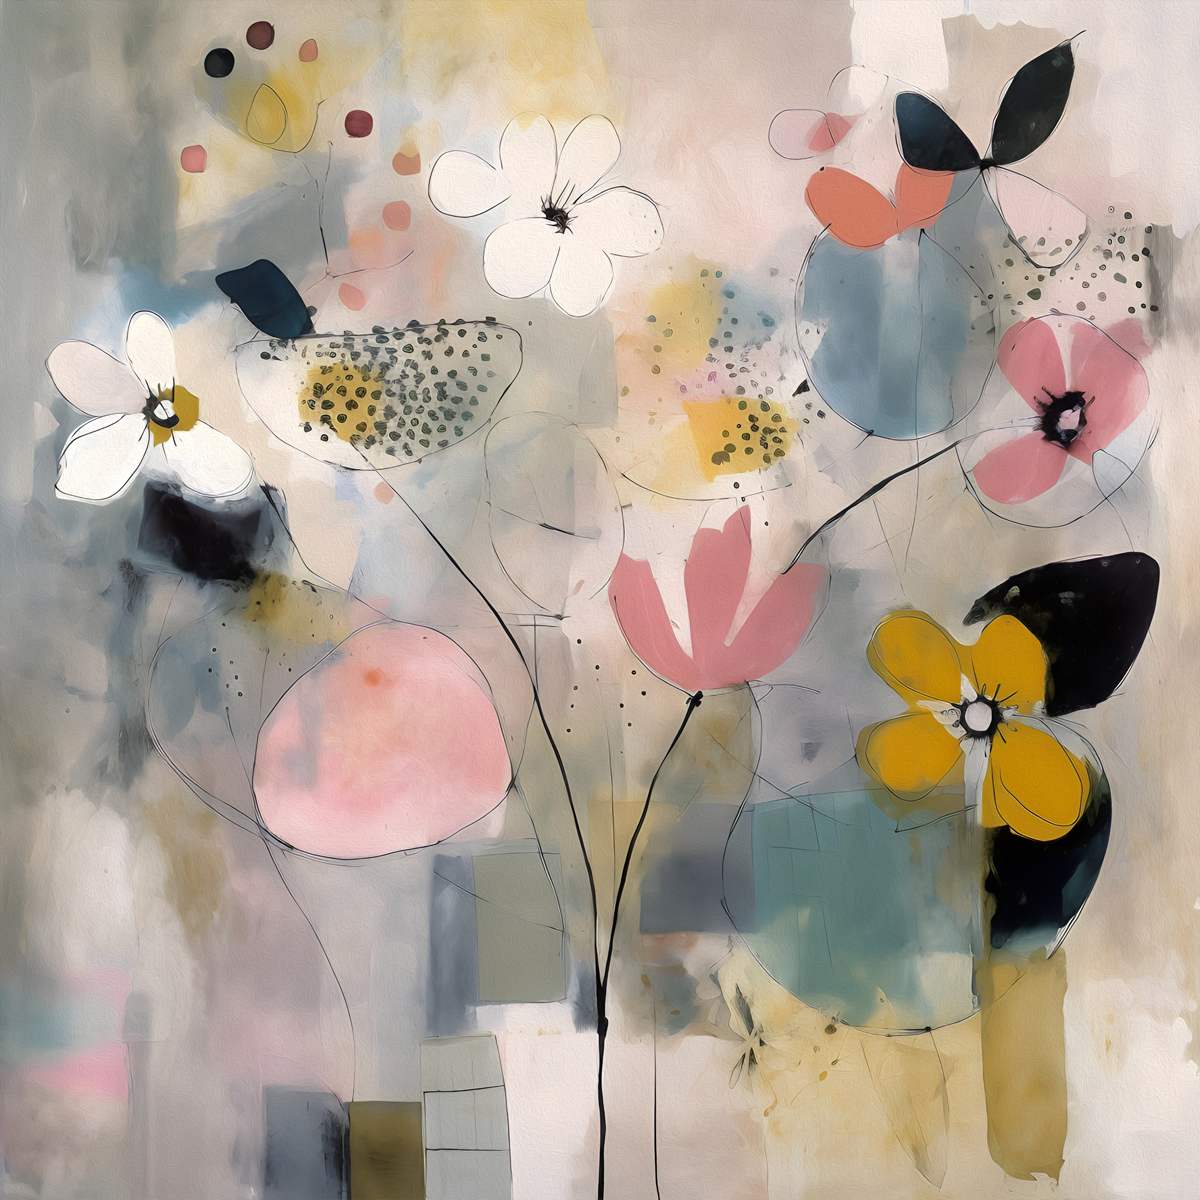  Romantic Blooms: 'Pink, White, and Yellow Flowers' Art Collection - Art Print on Canvas. Artemyst